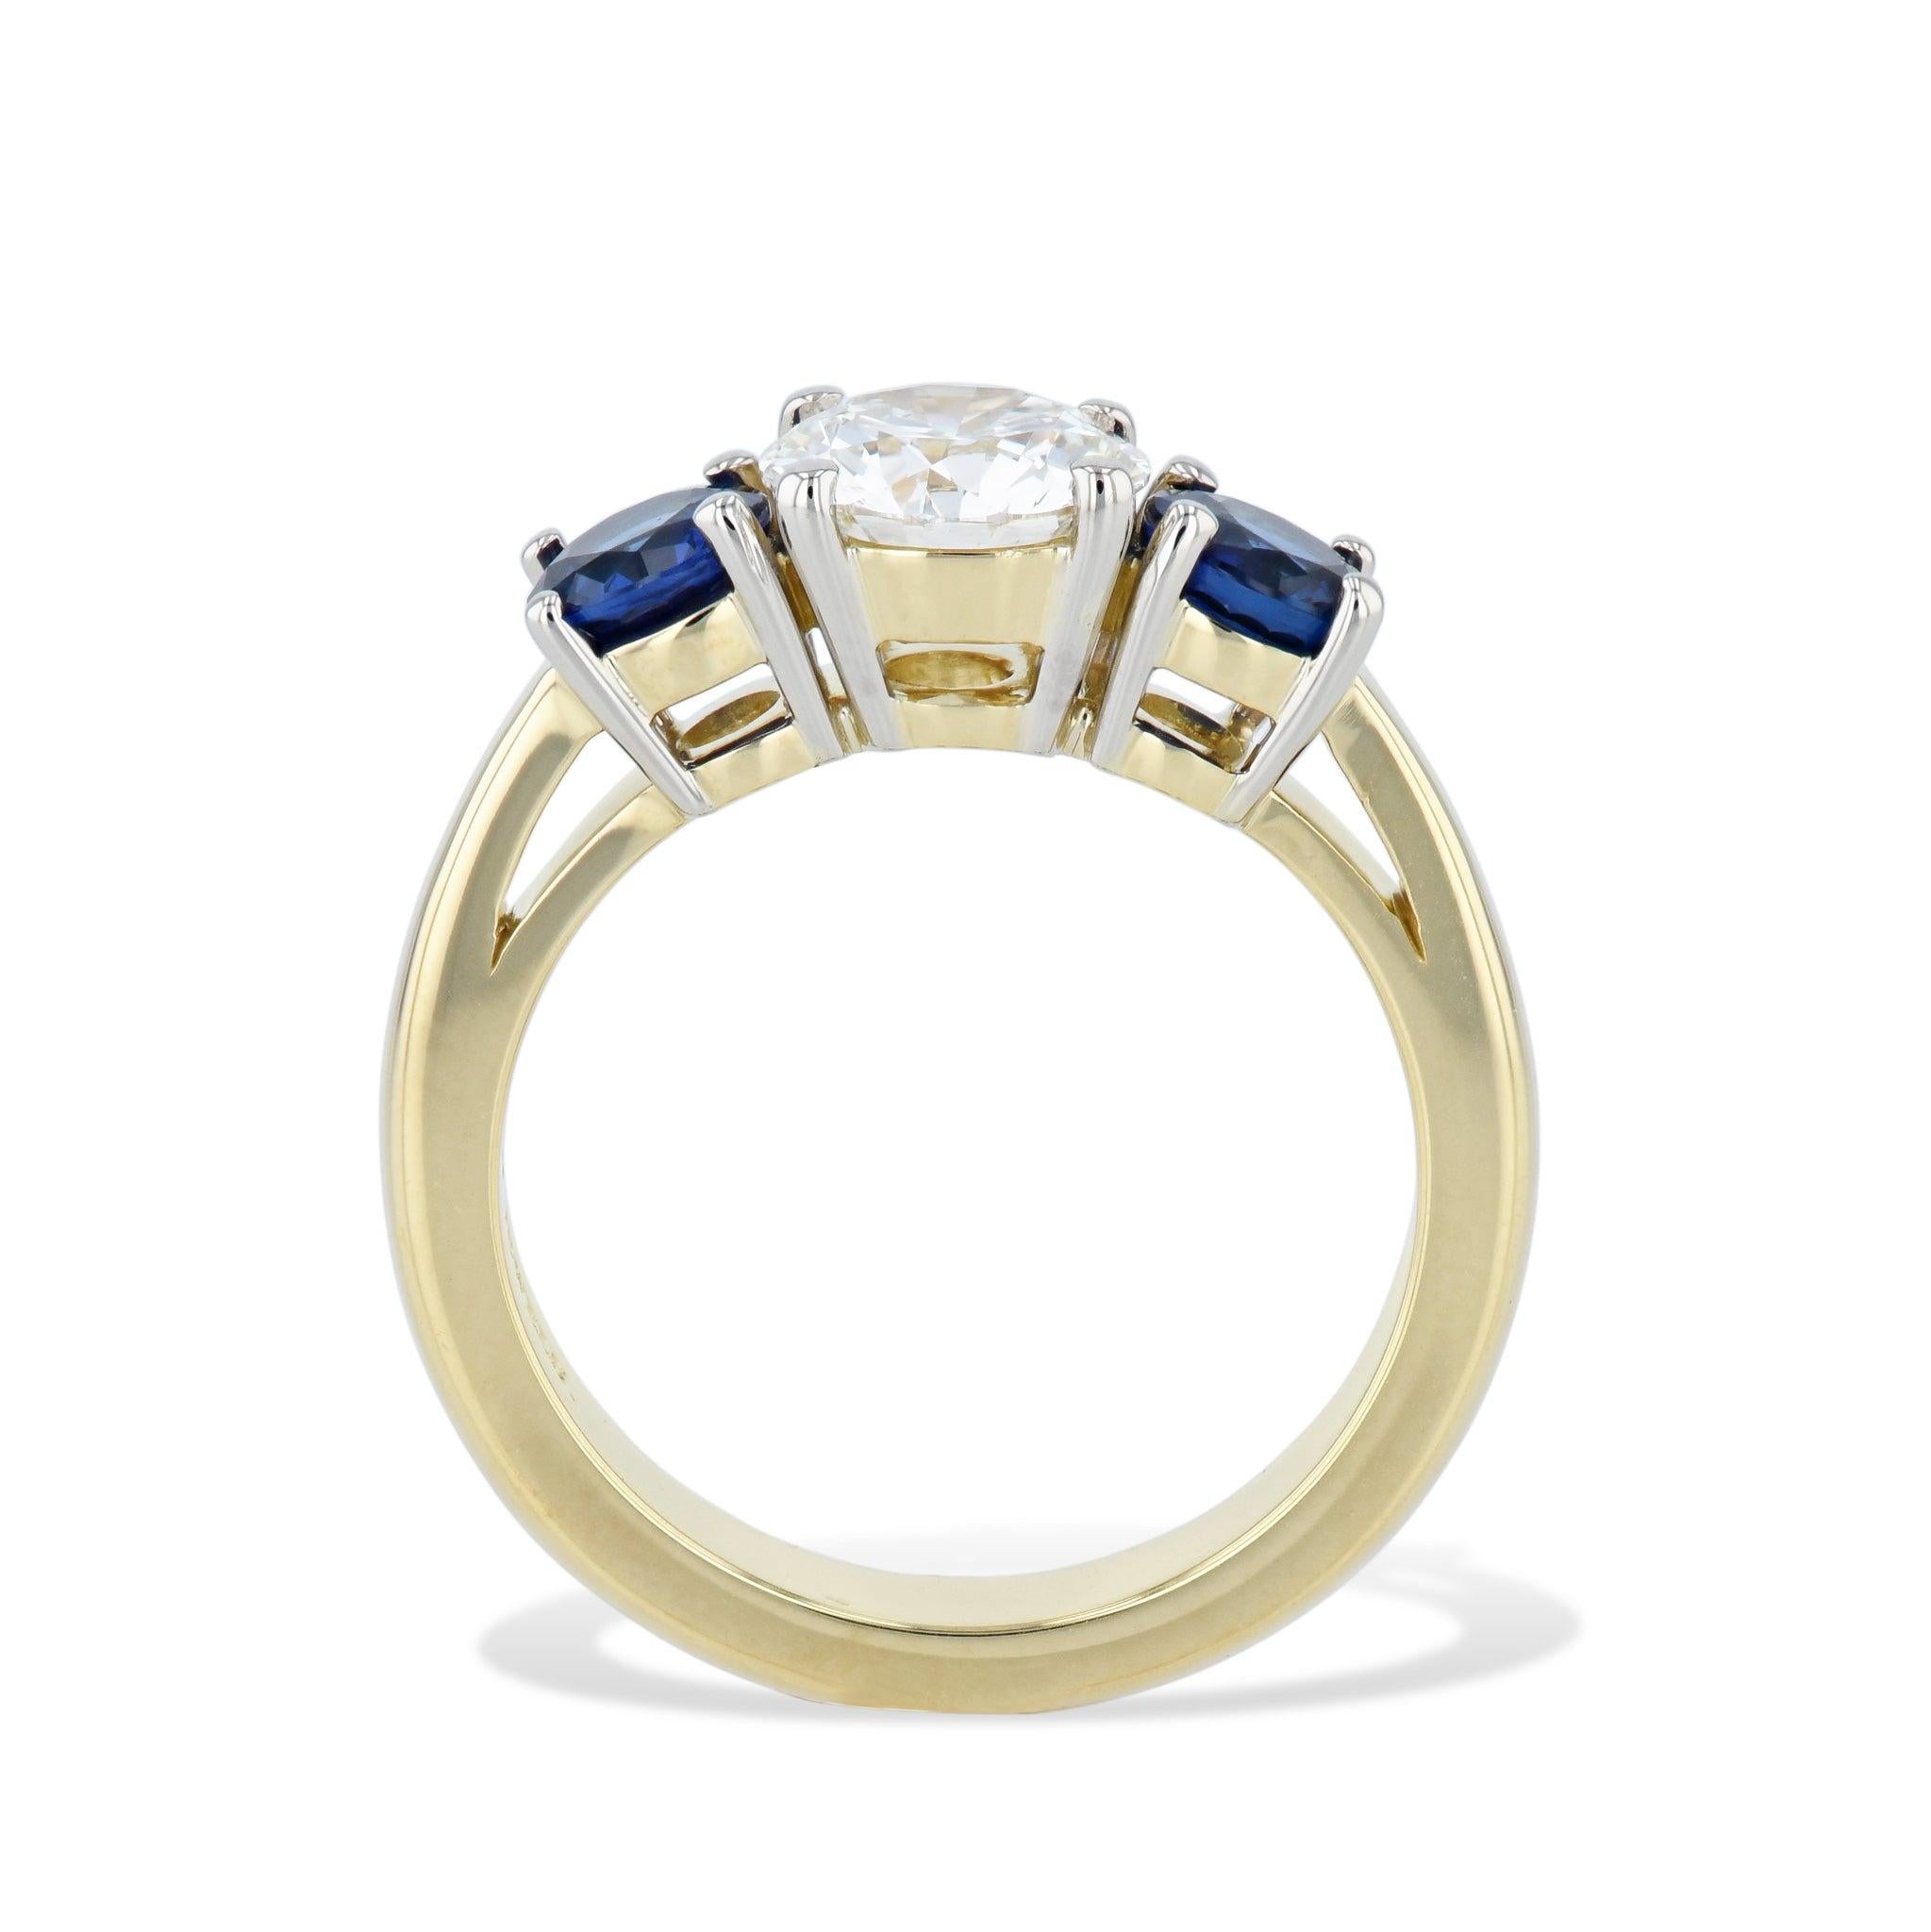 
This elegantly crafted in luxurious 18kt gold, this 3-stone ring speaks to the sophistication of its wearer. At its center lies a 1.53CT round brilliant diamond, I in color and VS2 in clarity. This is framed delicately by two exquisite blue